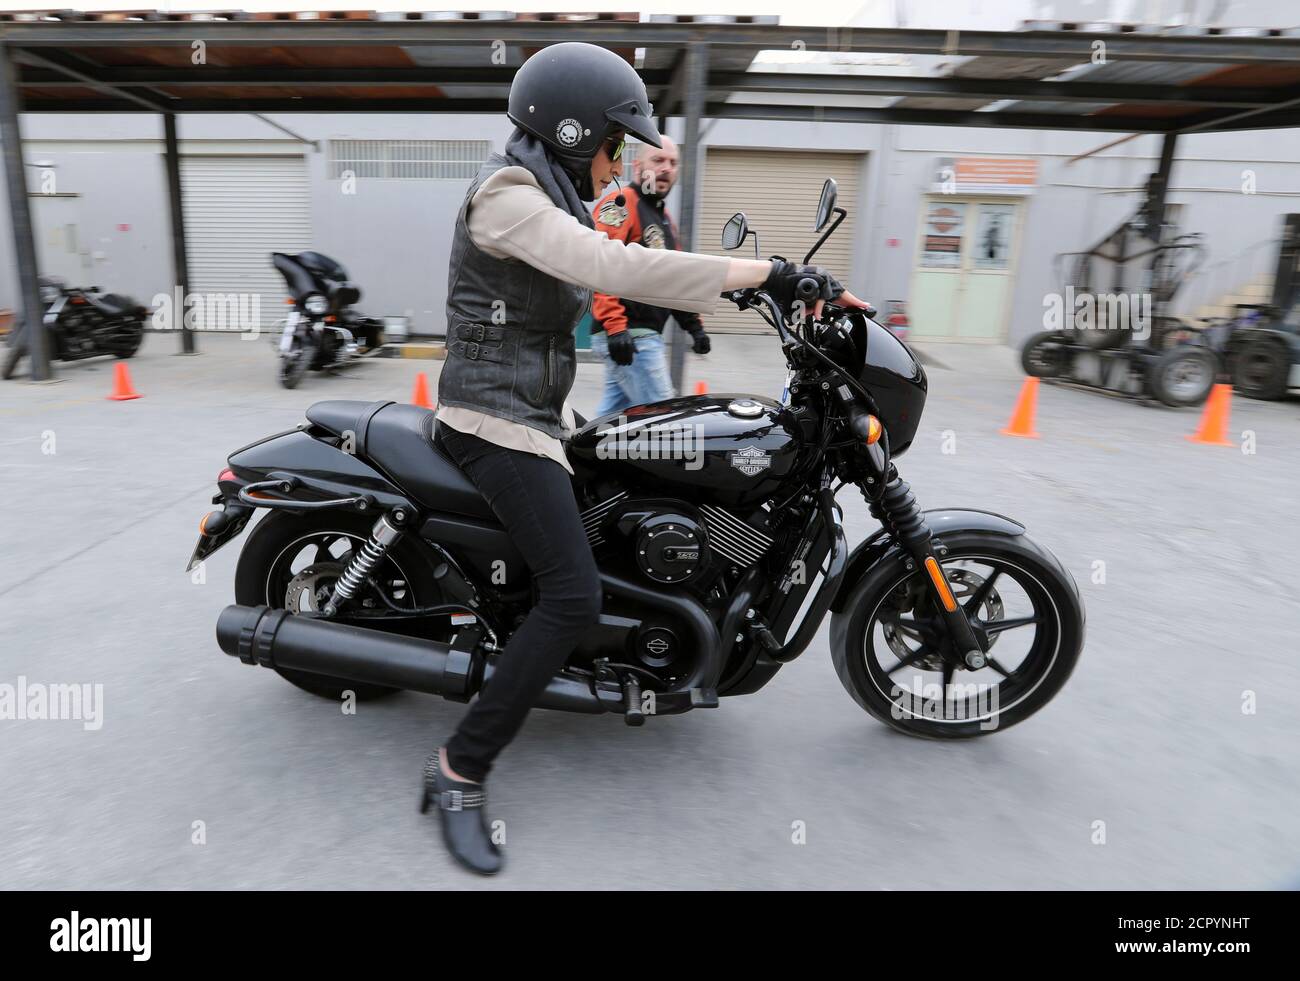 Maryam Ahmed Al Moalem A Saudi Female Bike Rider Rides A Biker During Her Lessons In Advanced Motorbike Training At Harley Davidson Training Centre In Manama Bahrain March 16 2018 Reuters Hamad I Mohammed